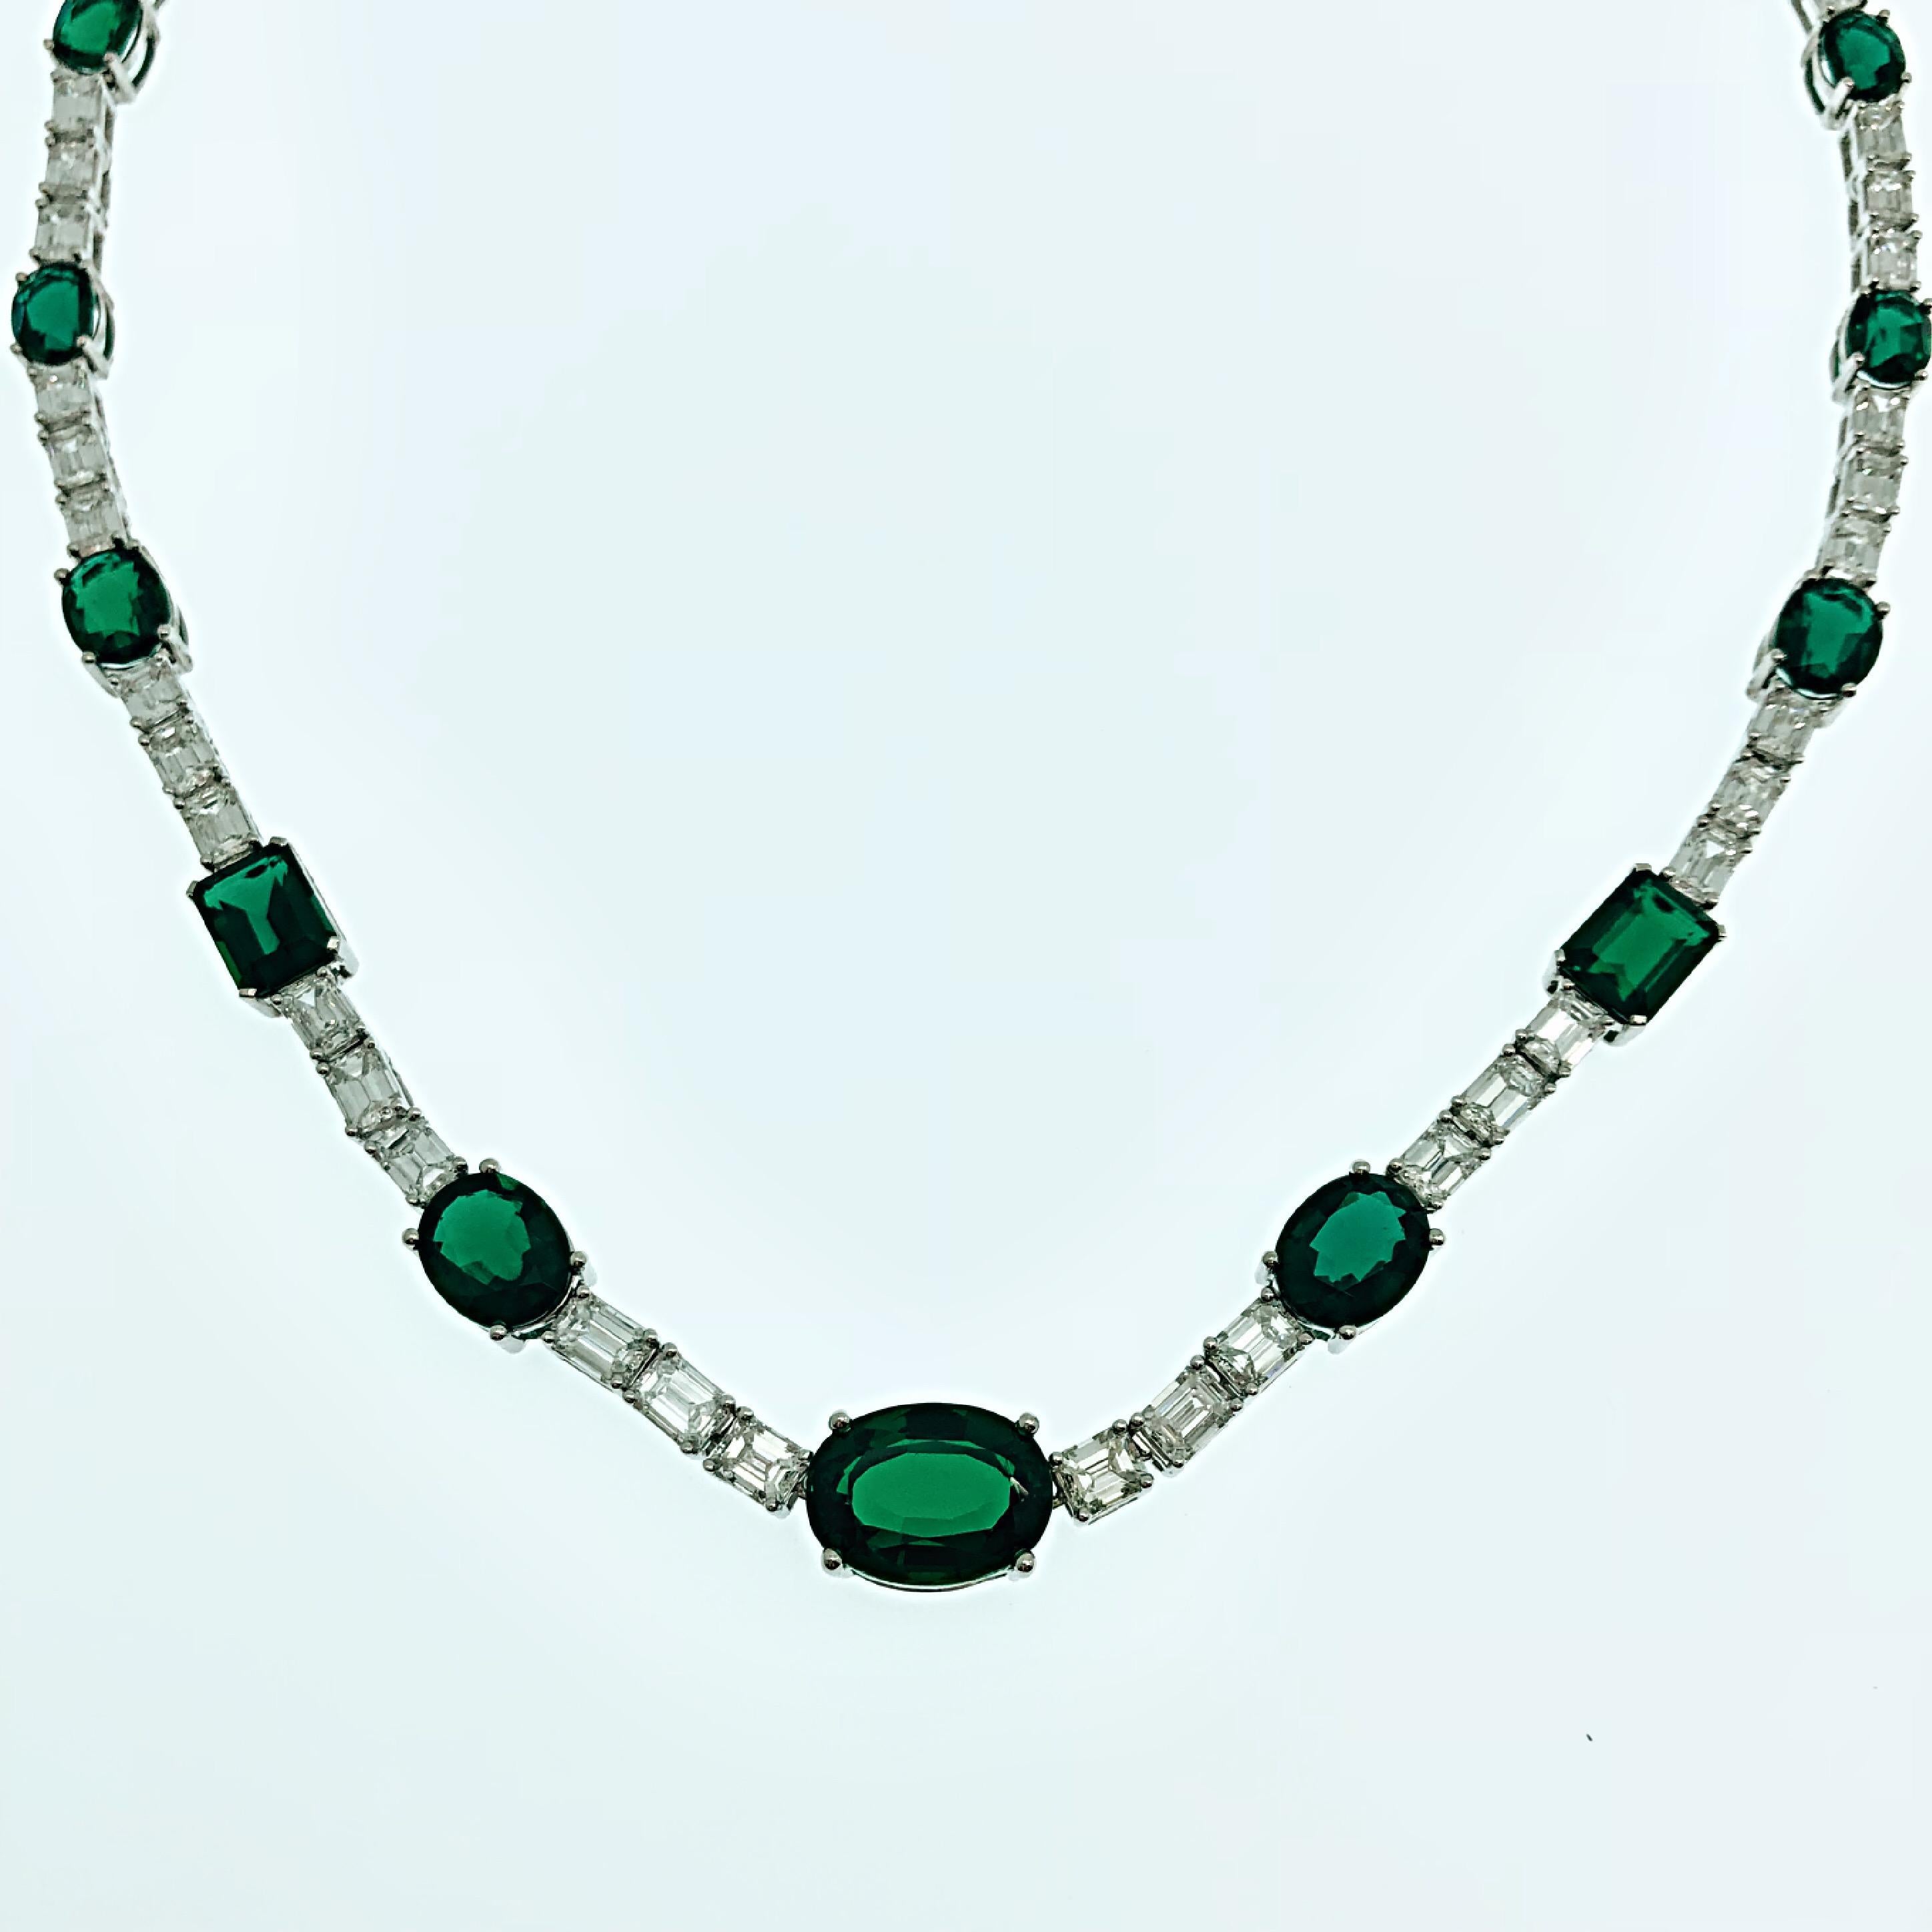 A necklace made to spark the most extravagant events and red carpets.
showcasing 13 LAB grown deep vivid green synthetic Emeralds of 26.96ct in total , 36 emerald cut natural diamonds of top range quality weighing a total of 12.67ct and 45 brilliant